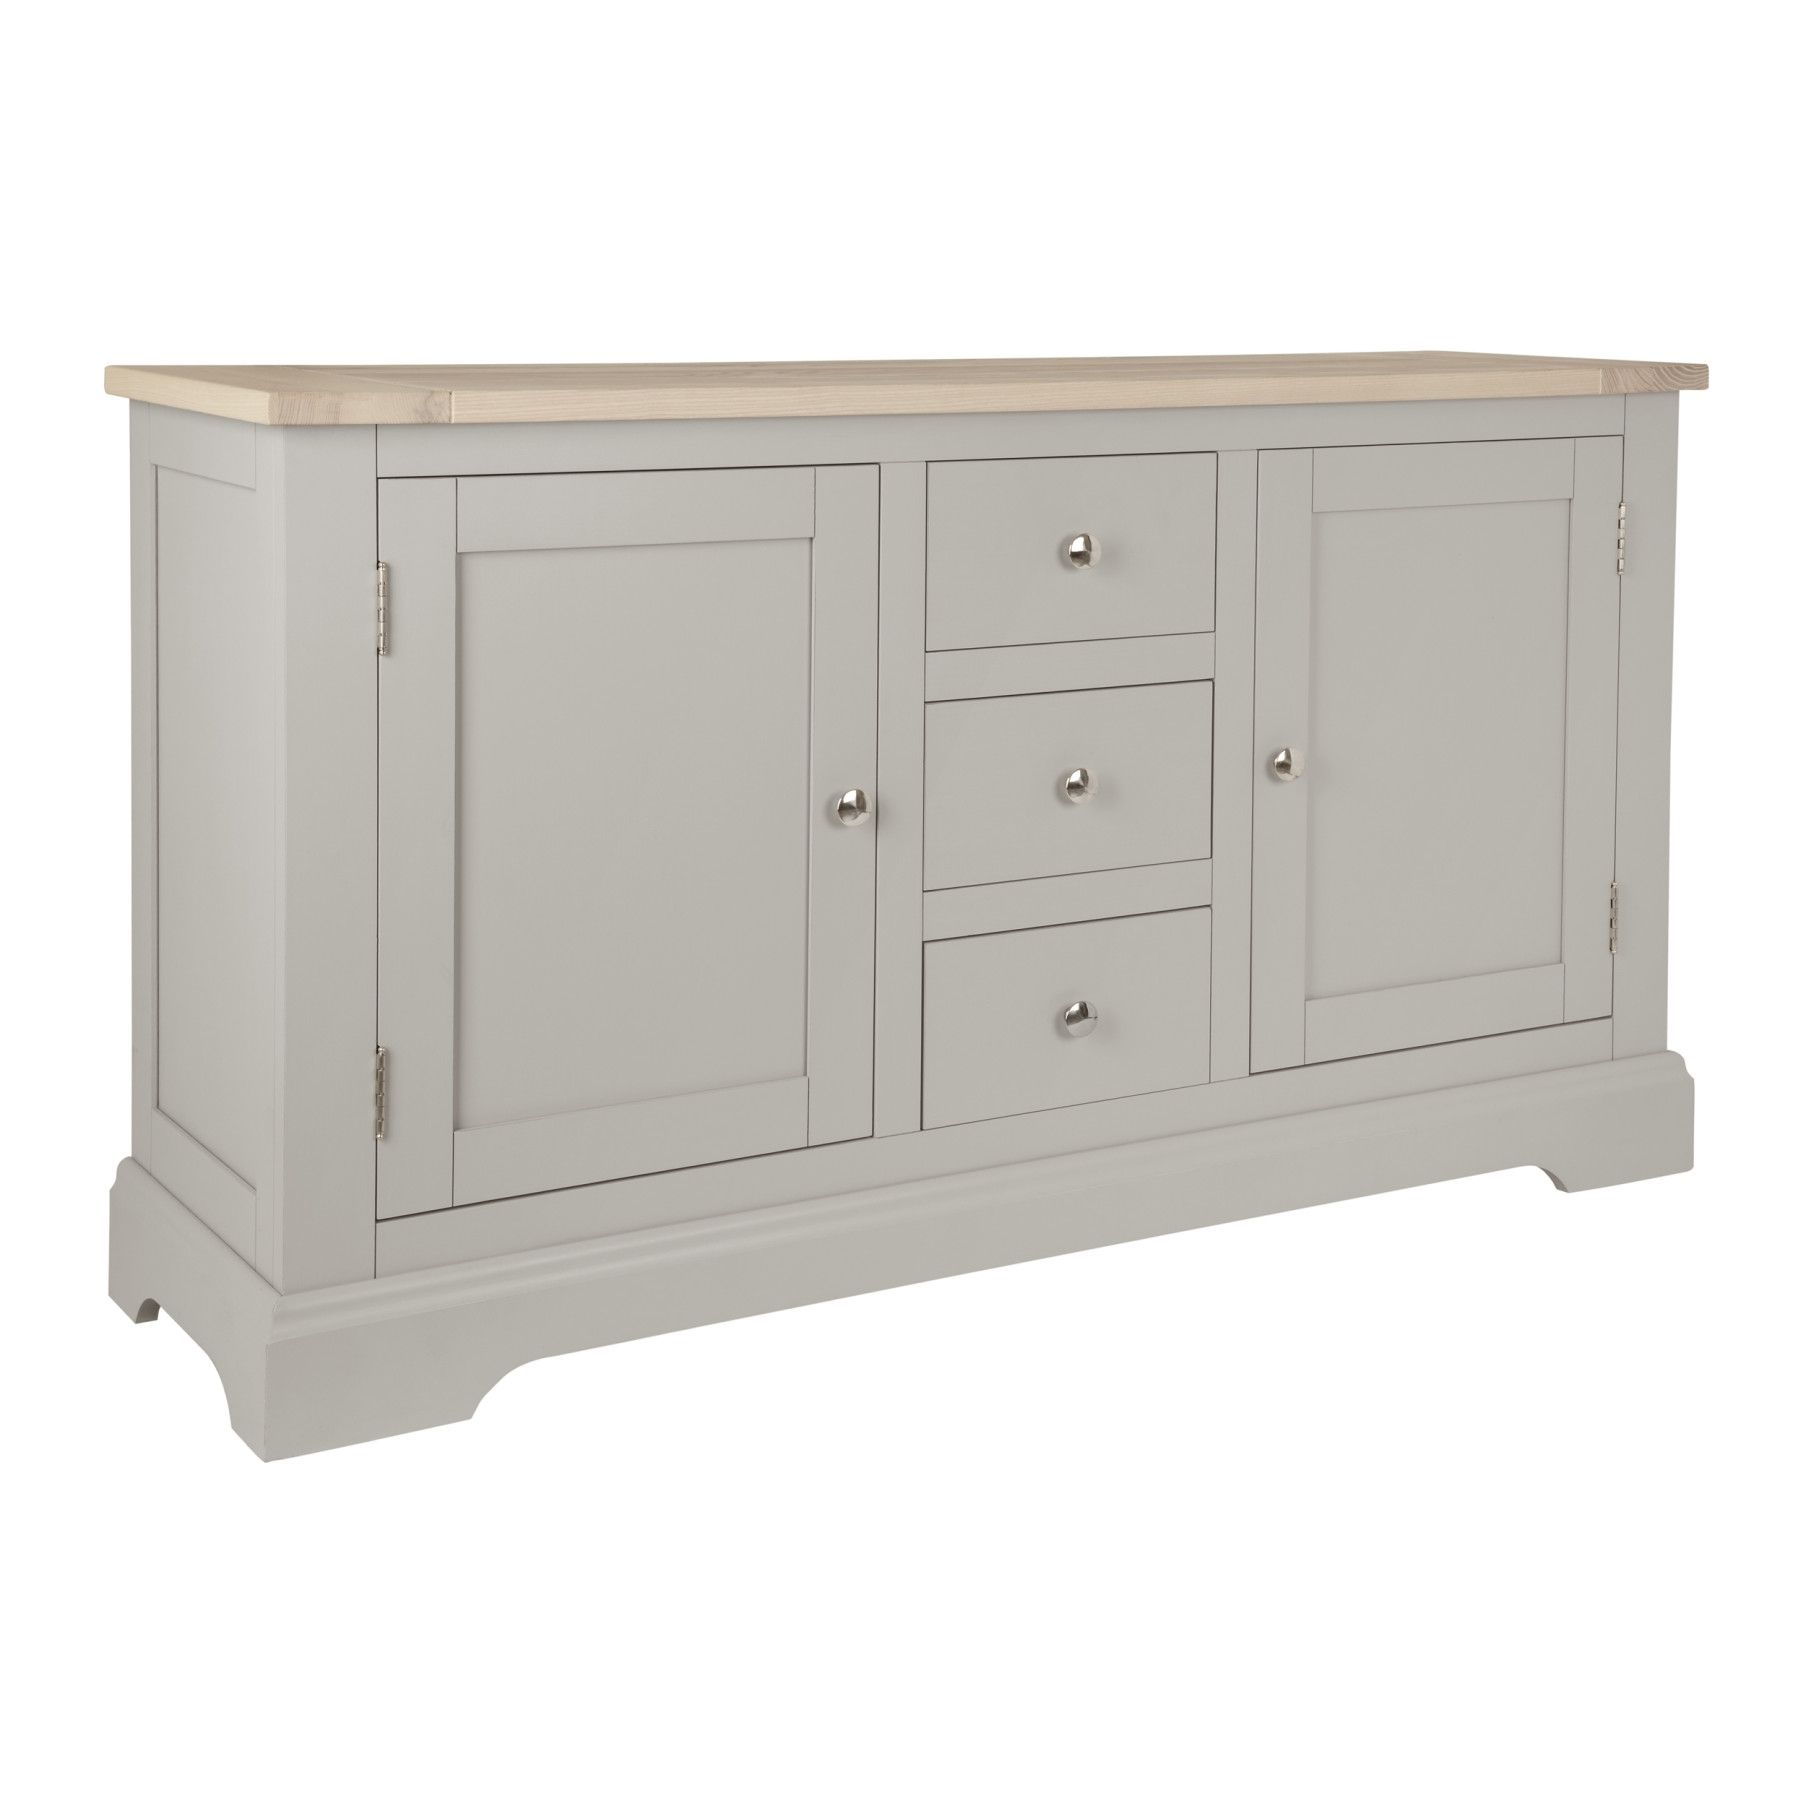 Made To Order Furniture – Dorset Pale French Grey 2 Door 3 Drawer Within Antique White Distressed 3 Drawer/2 Door Sideboards (View 23 of 30)